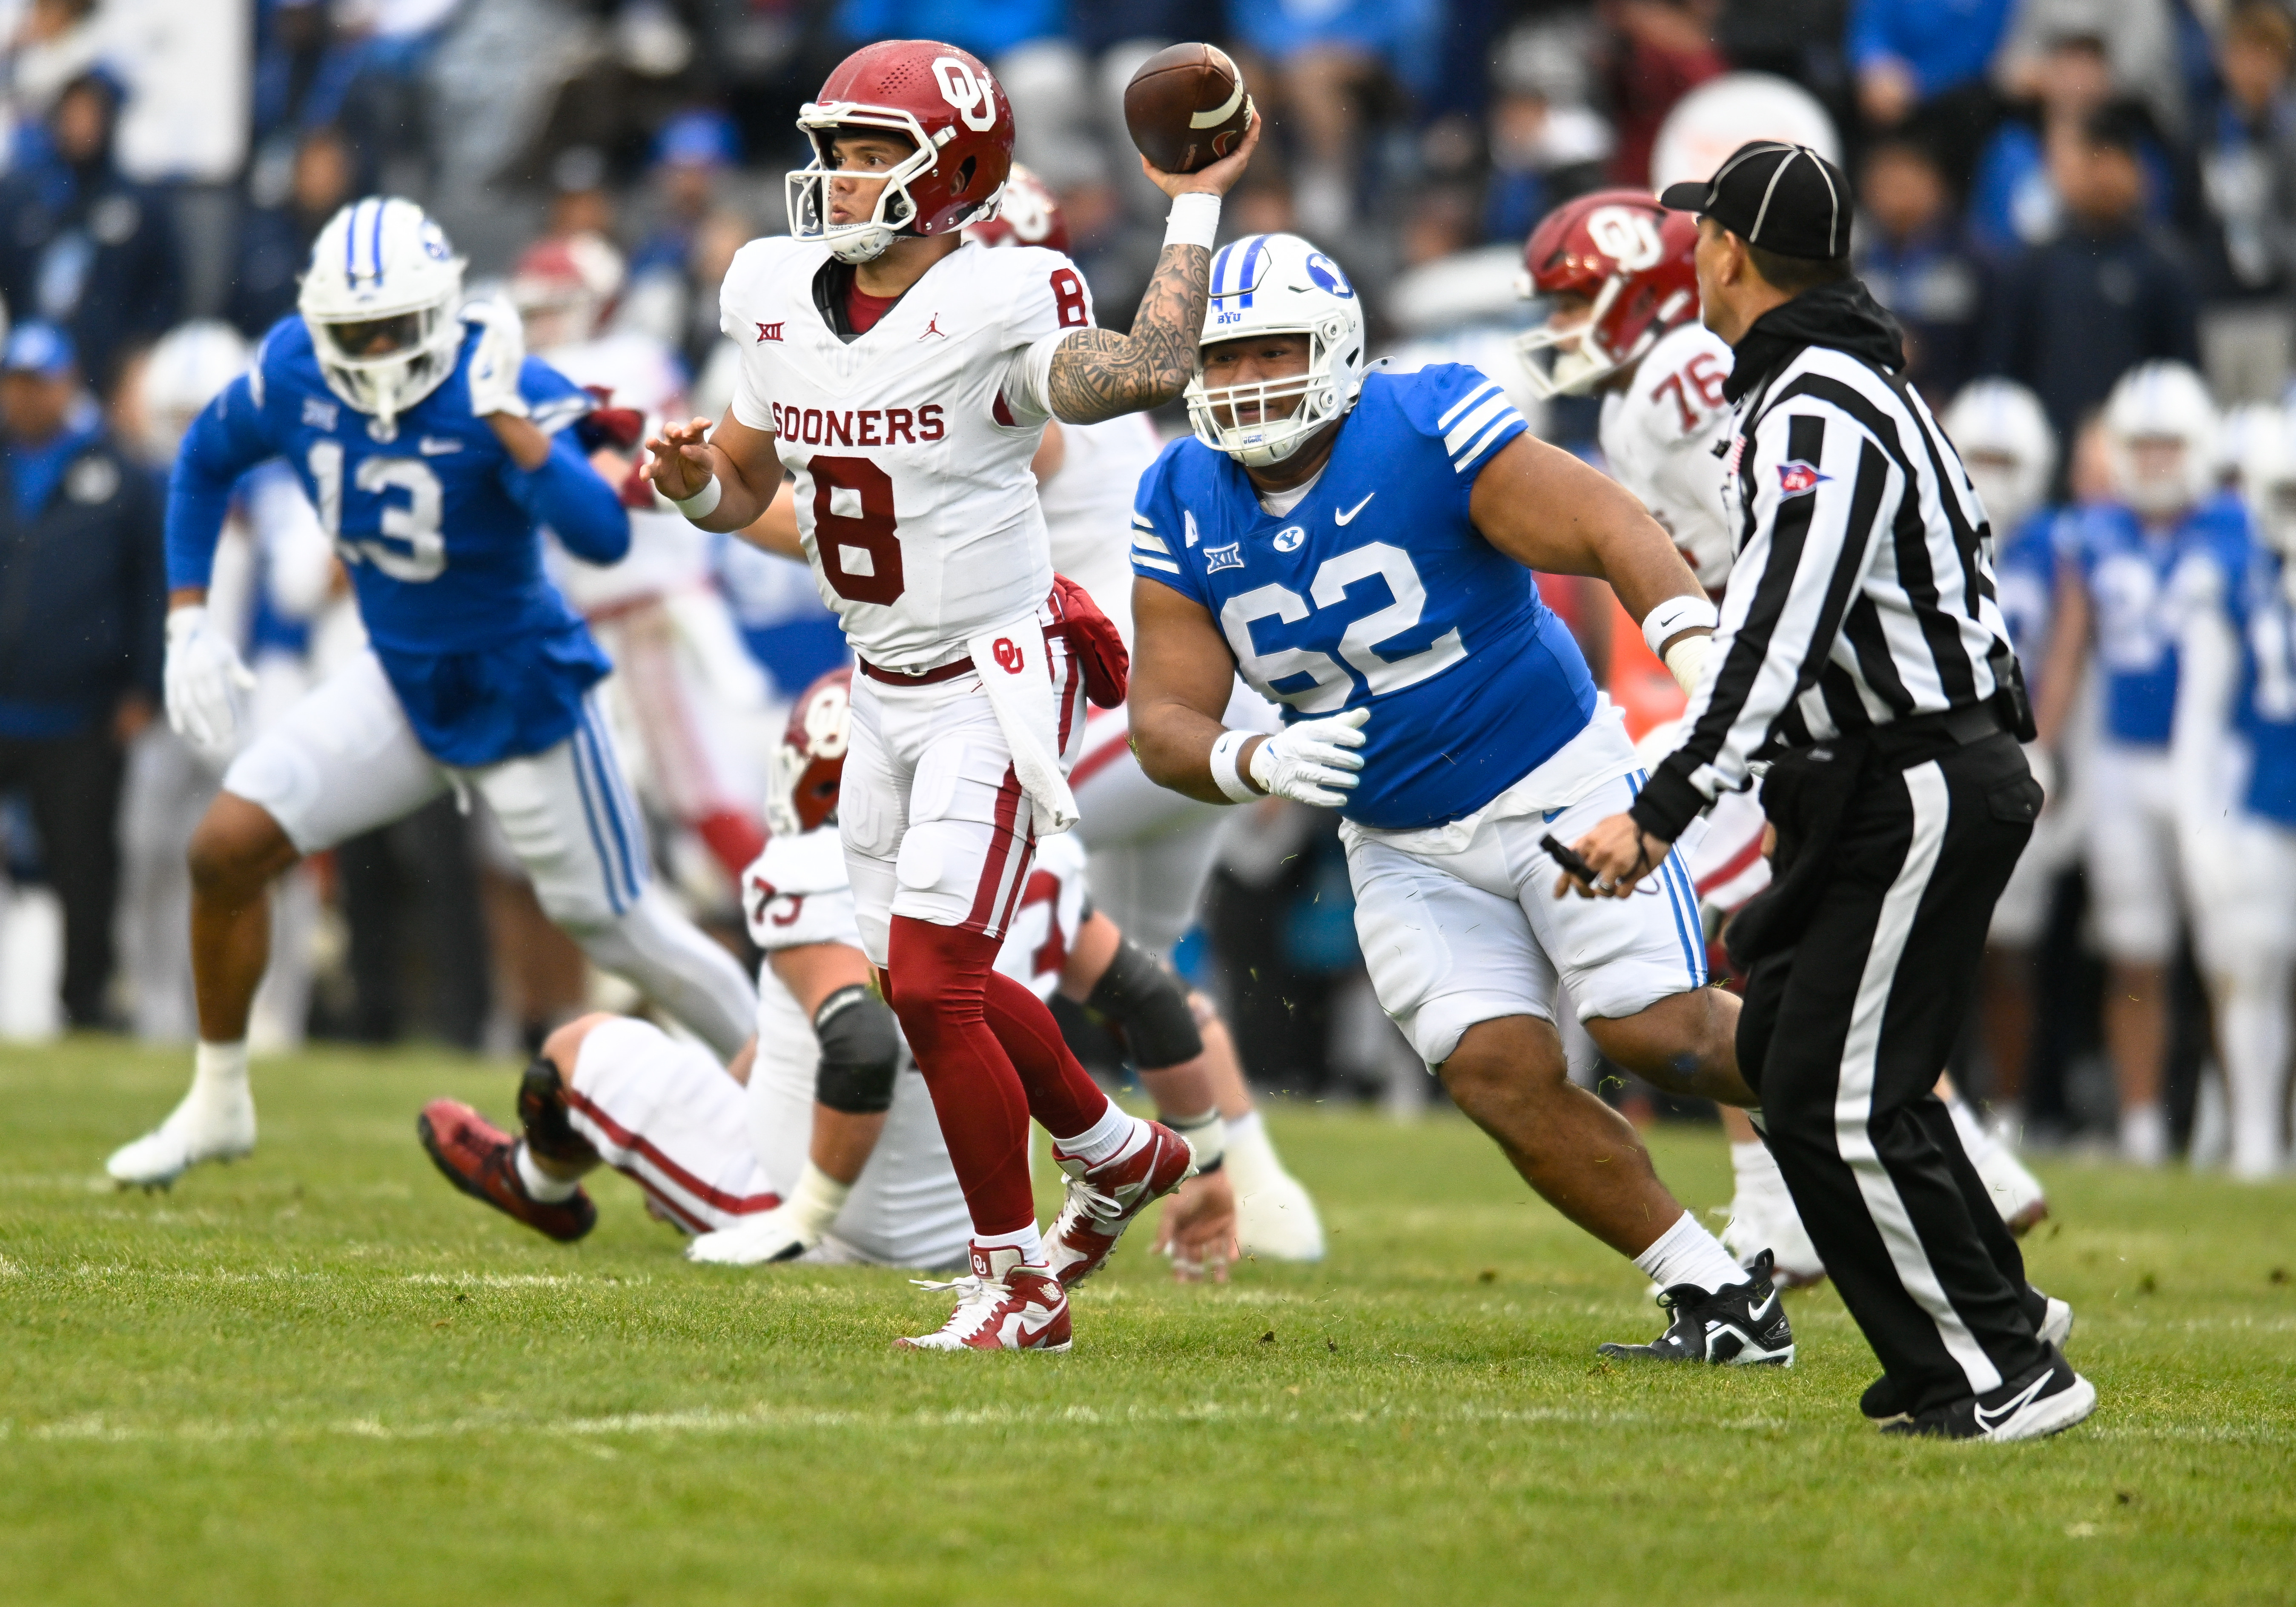 Oklahoma Sooners quarterback Dillon Gabriel makes a pass during a college football game between the Oklahoma Sooners and the BYU Cougars on November 18, 2023 at LaVell Edwards Stadium in Provo, Utah.